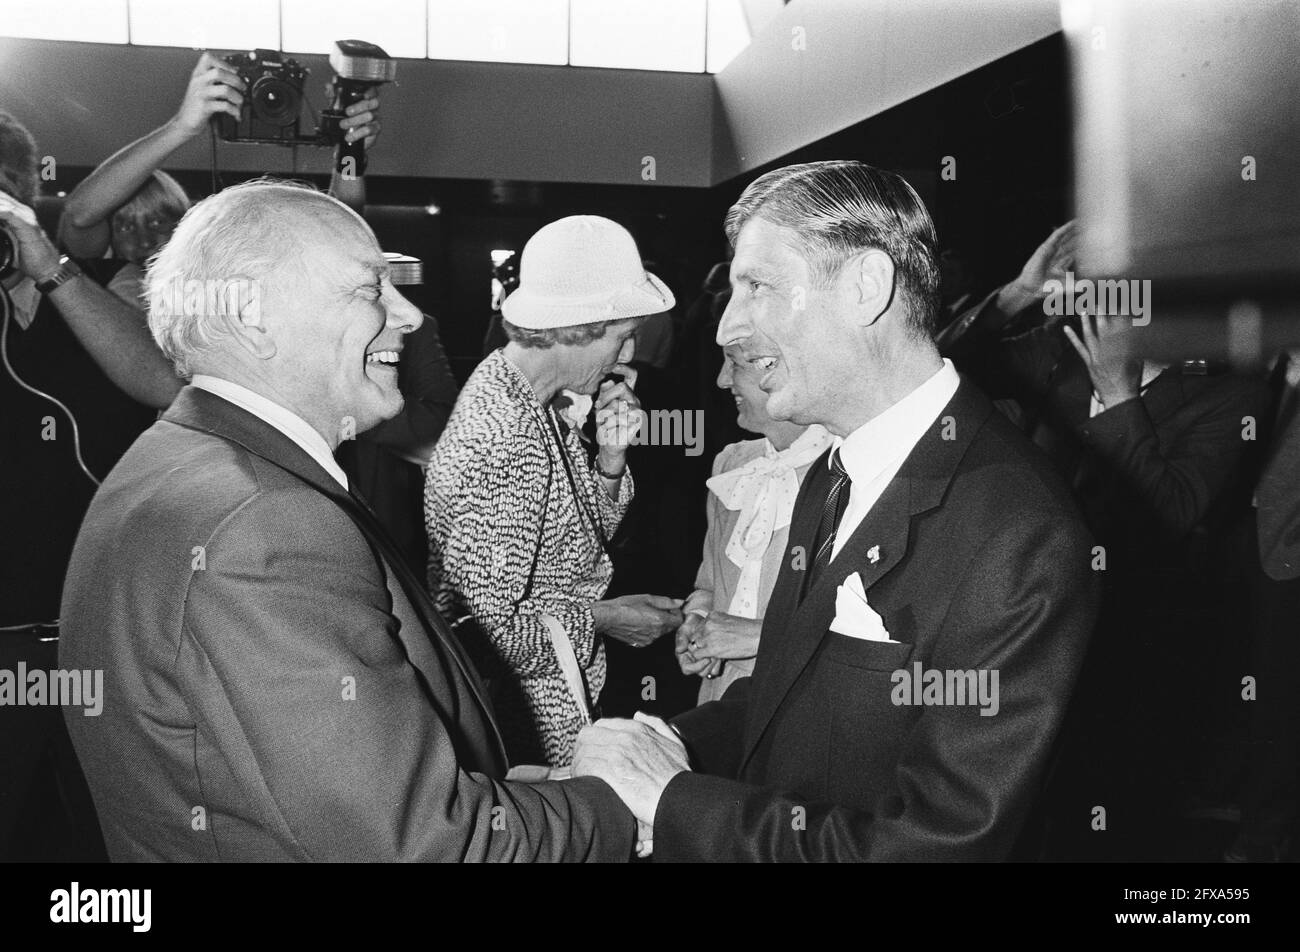 Mr. Joop den Uyl (PvdA) (l) congratulates Mr. Van Agt, June 21, 1983, acceptances into office, Queen's Commissioners, members of parliament, The Netherlands, 20th century press agency photo, news to remember, documentary, historic photography 1945-1990, visual stories, human history of the Twentieth Century, capturing moments in time Stock Photo